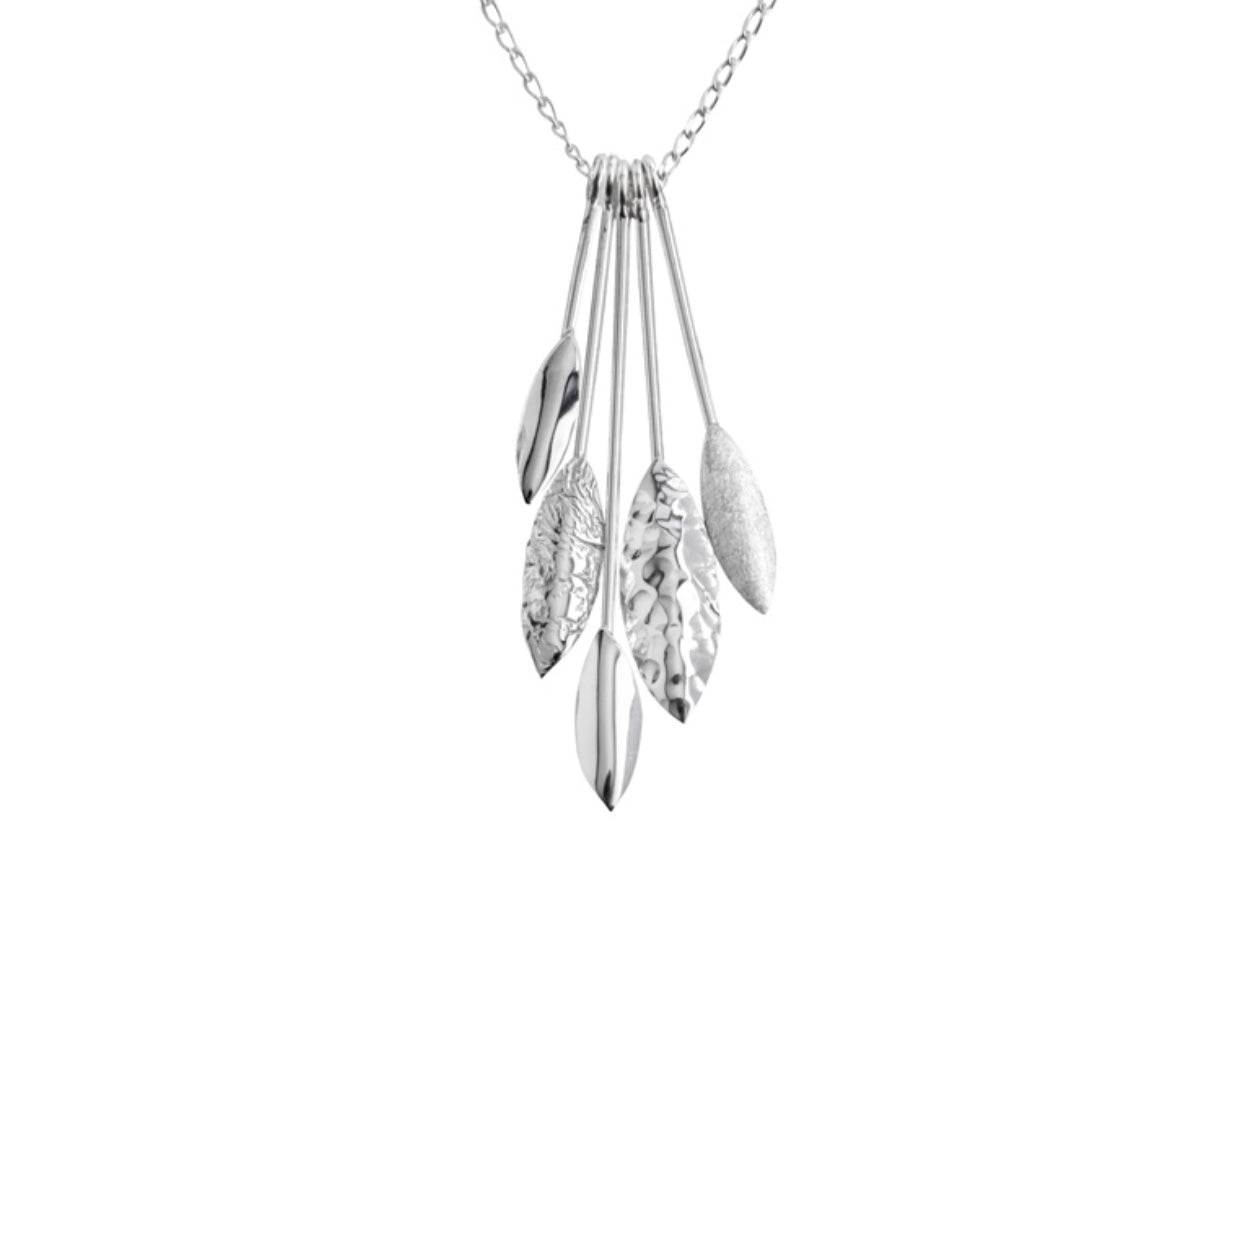 Chris Lewis Hanging Leaves Necklace